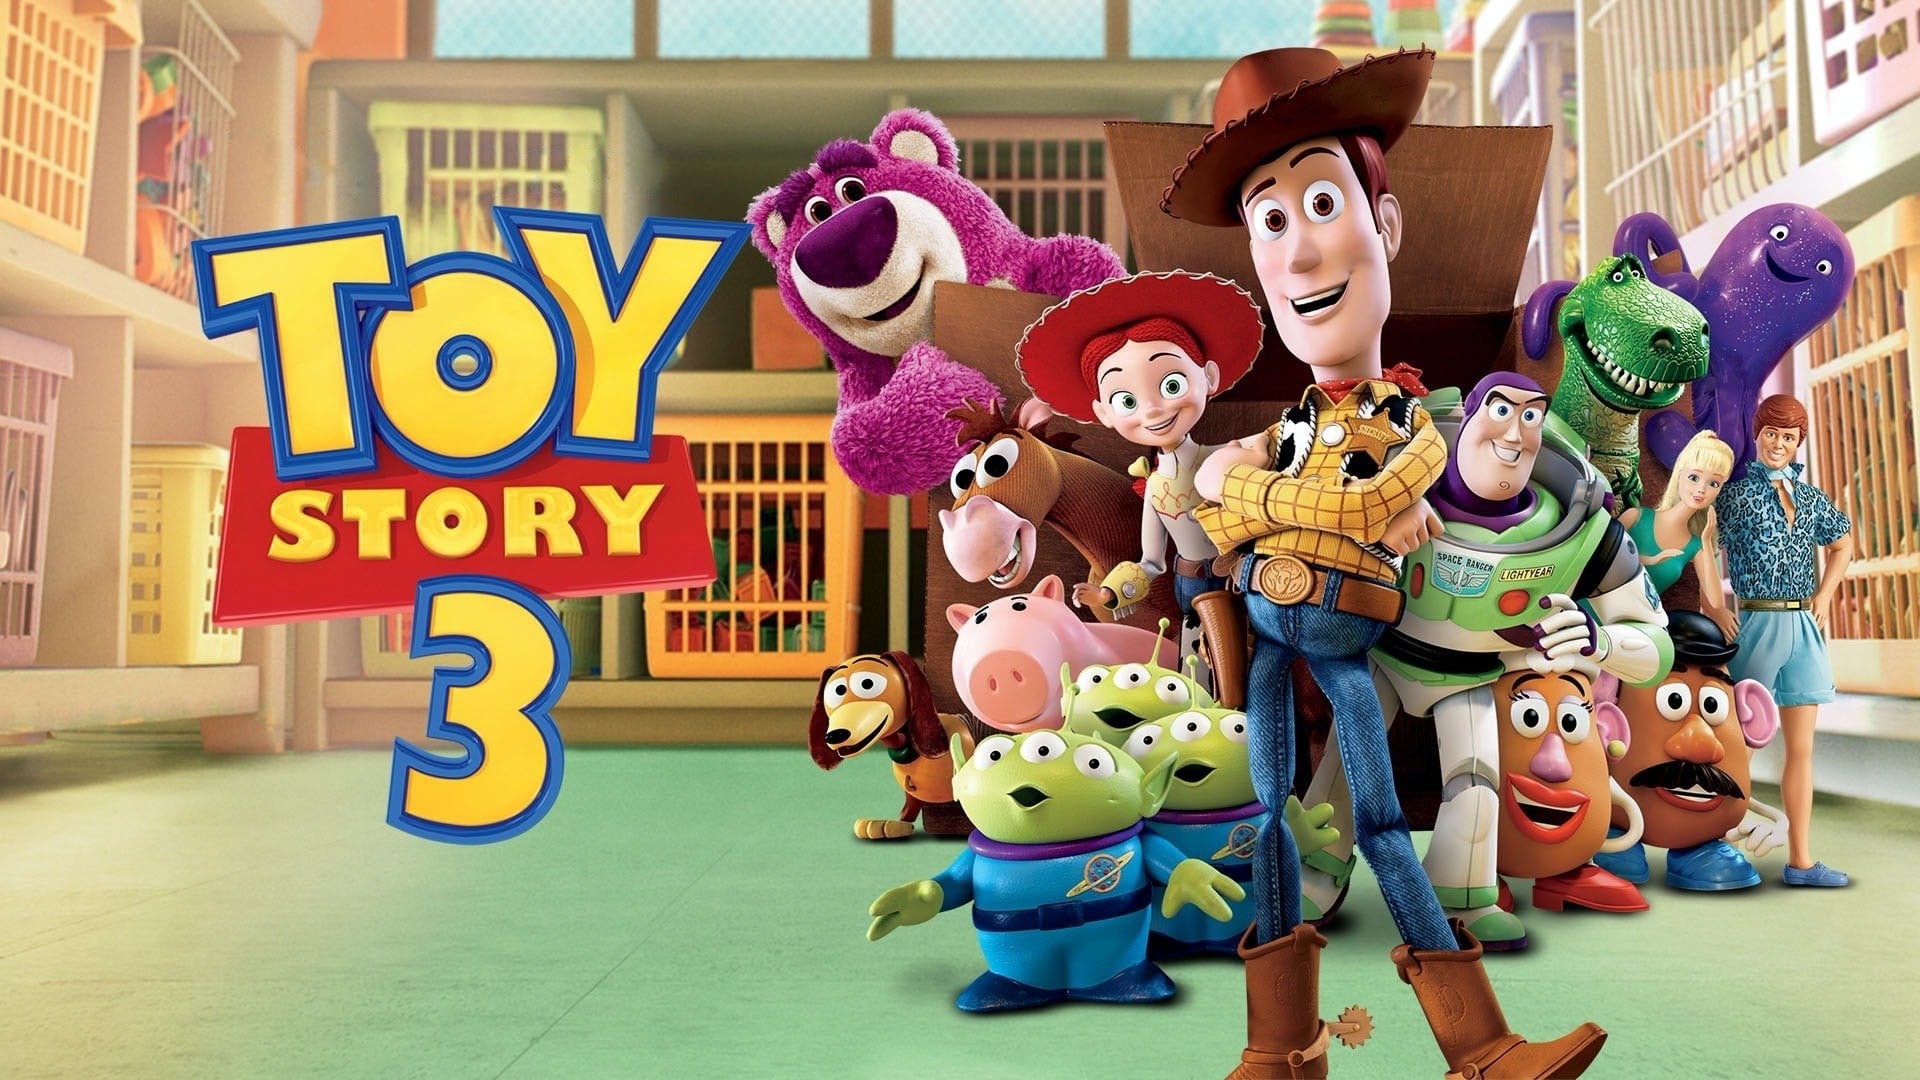 Toy Story 3 (2010)